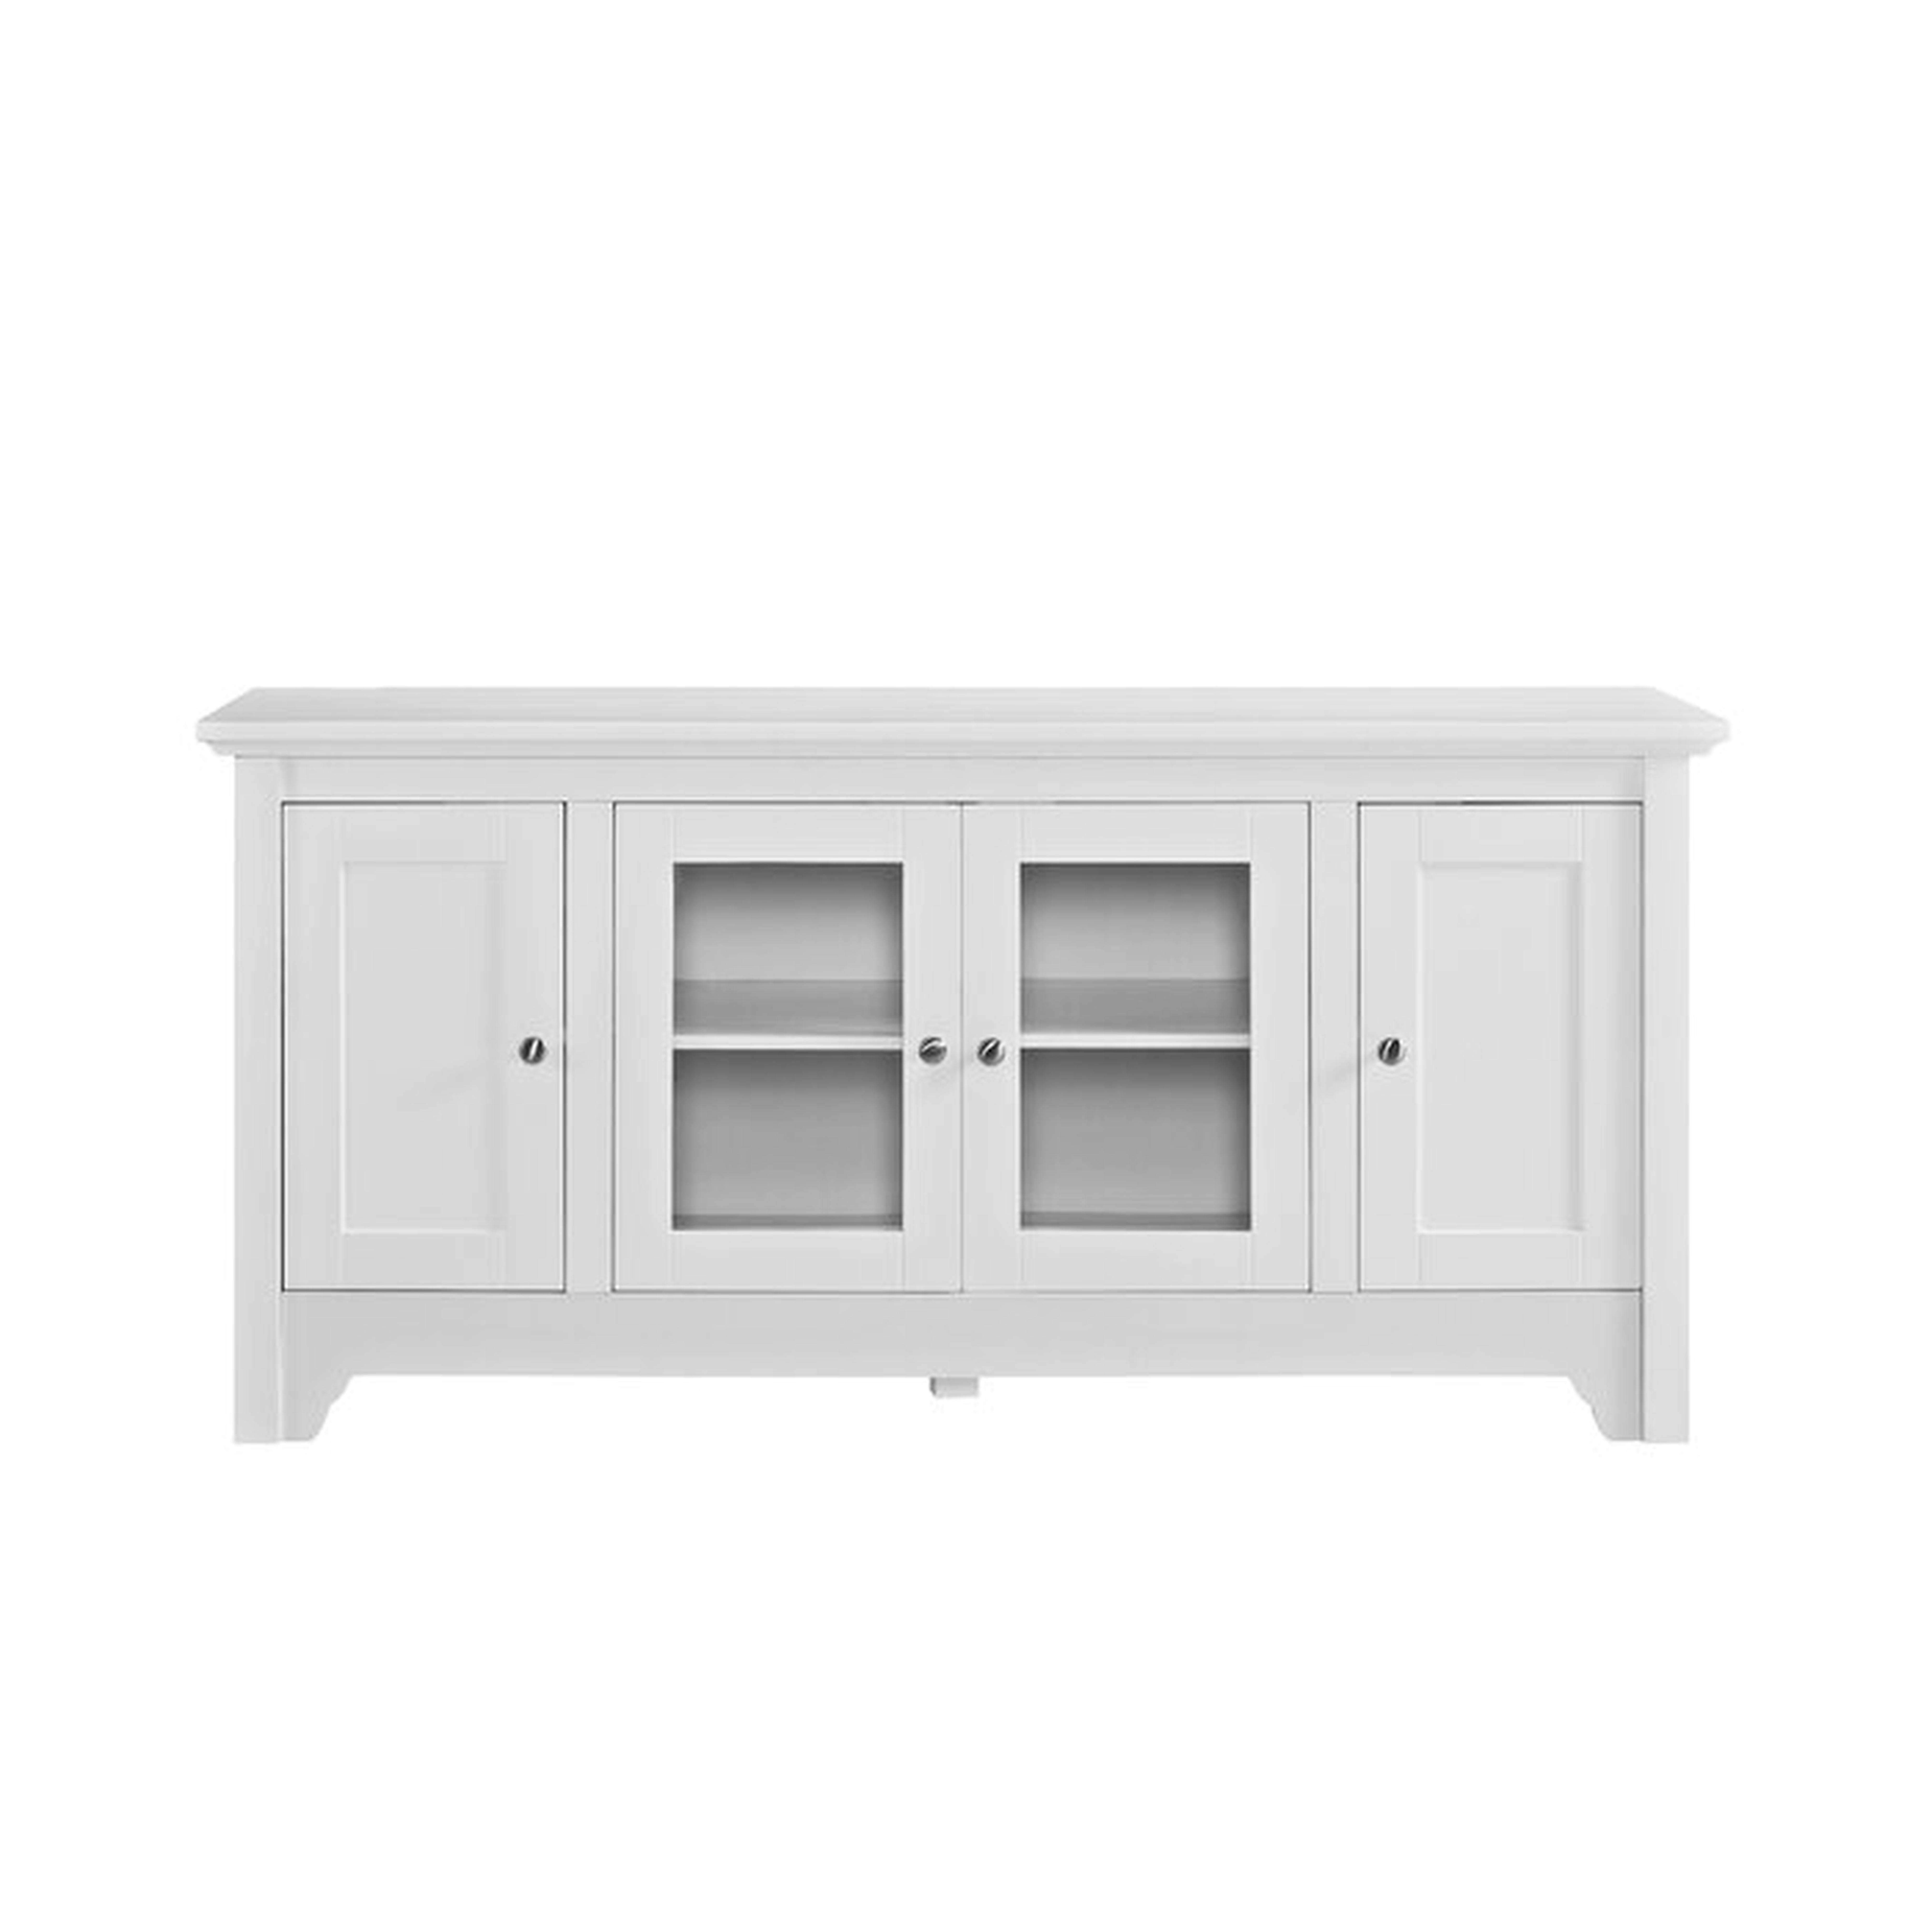 Bracamonte TV Stand for TVs up to 58 inches - Birch Lane